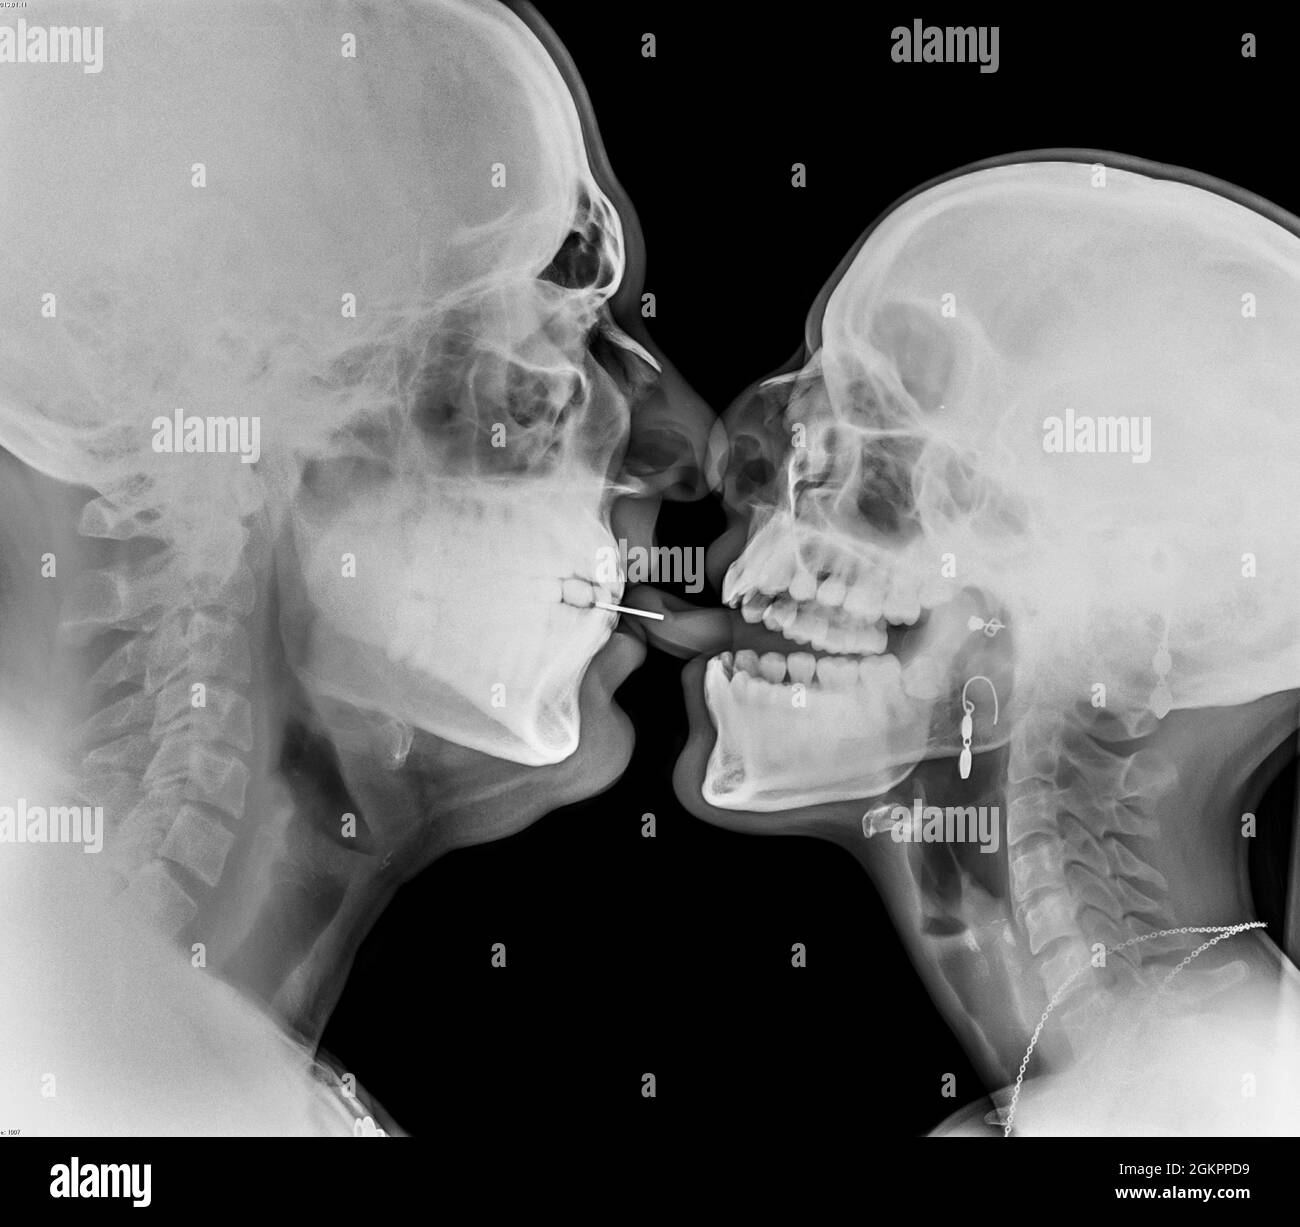 Kissing Couple. Two people kissing under x-ray pierced tongue can be seen Stock Photo